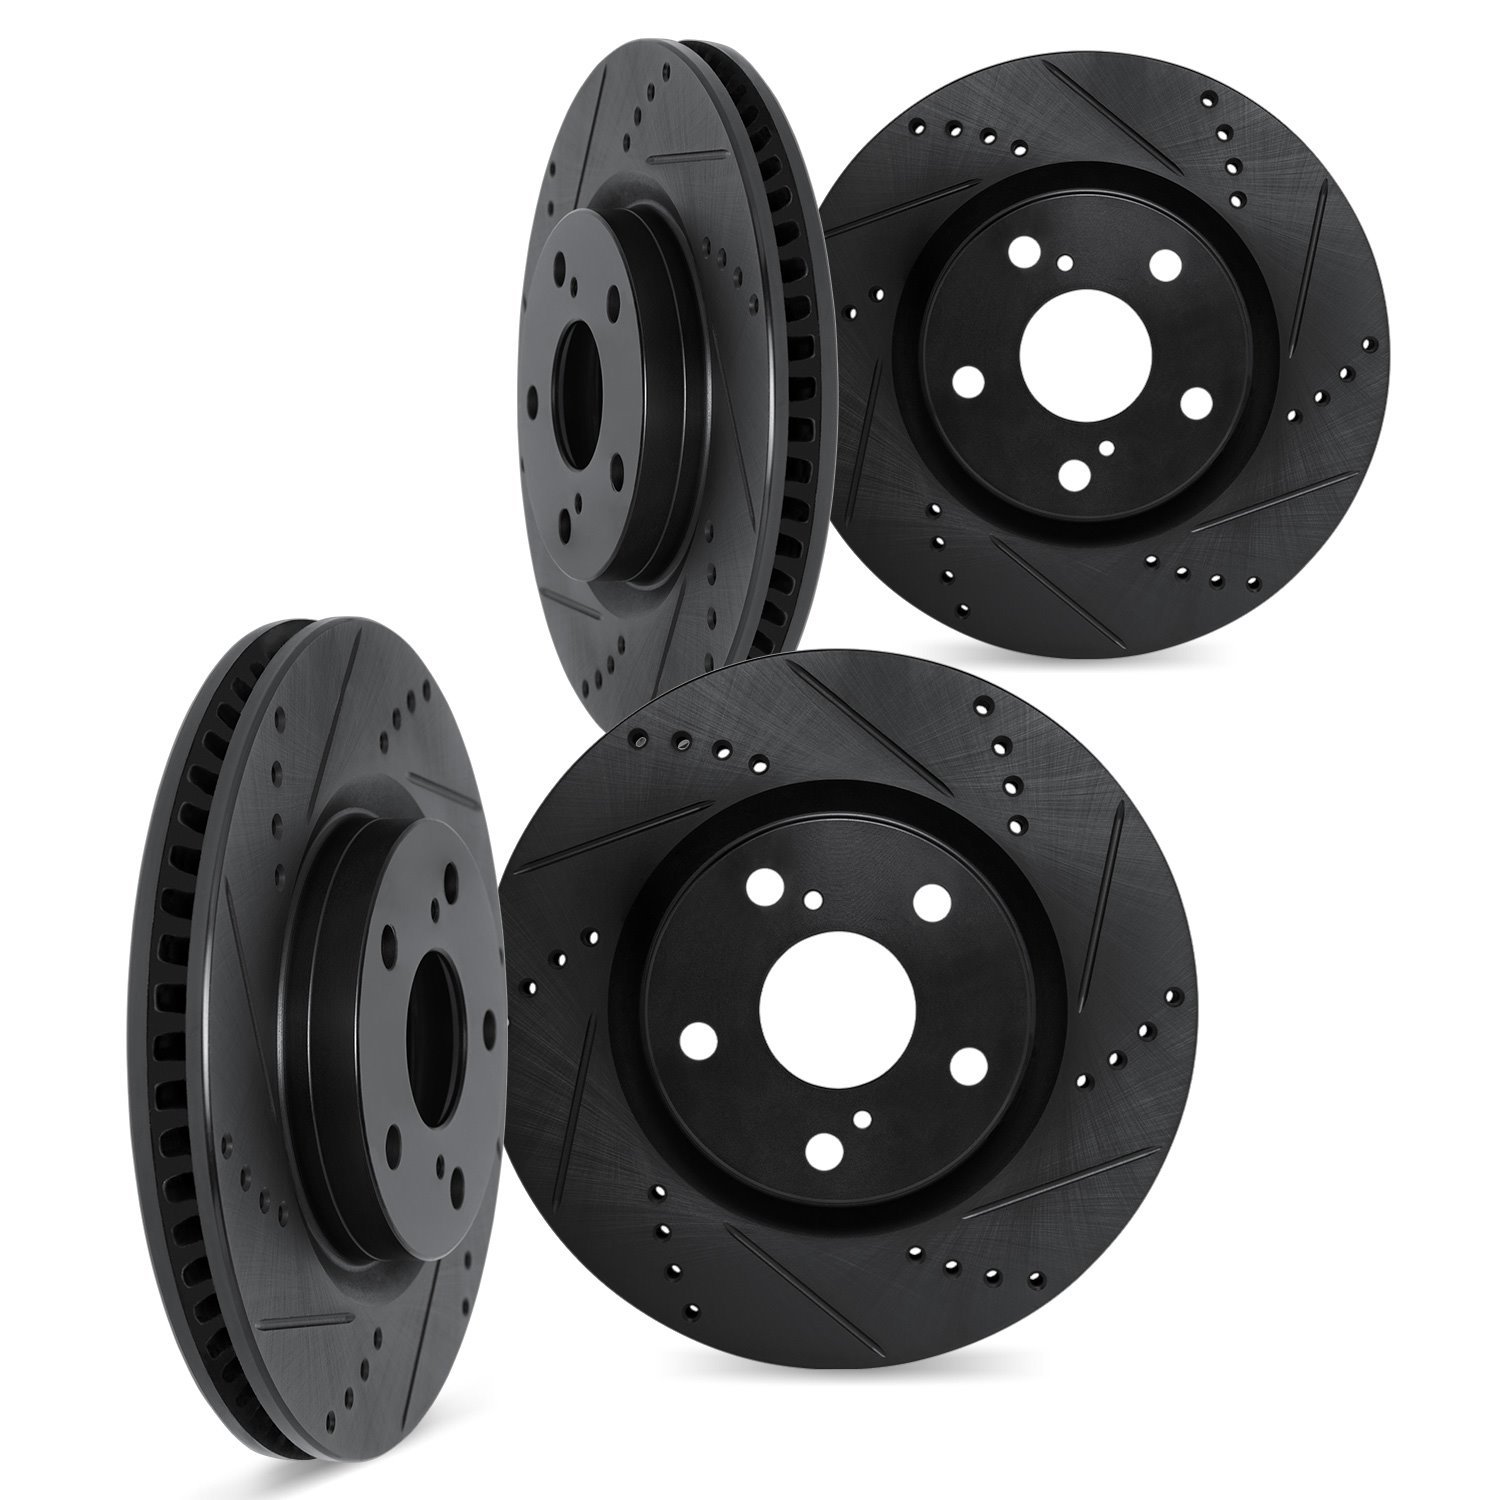 8004-76131 Drilled/Slotted Brake Rotors [Black], 1991-1997 Lexus/Toyota/Scion, Position: Front and Rear